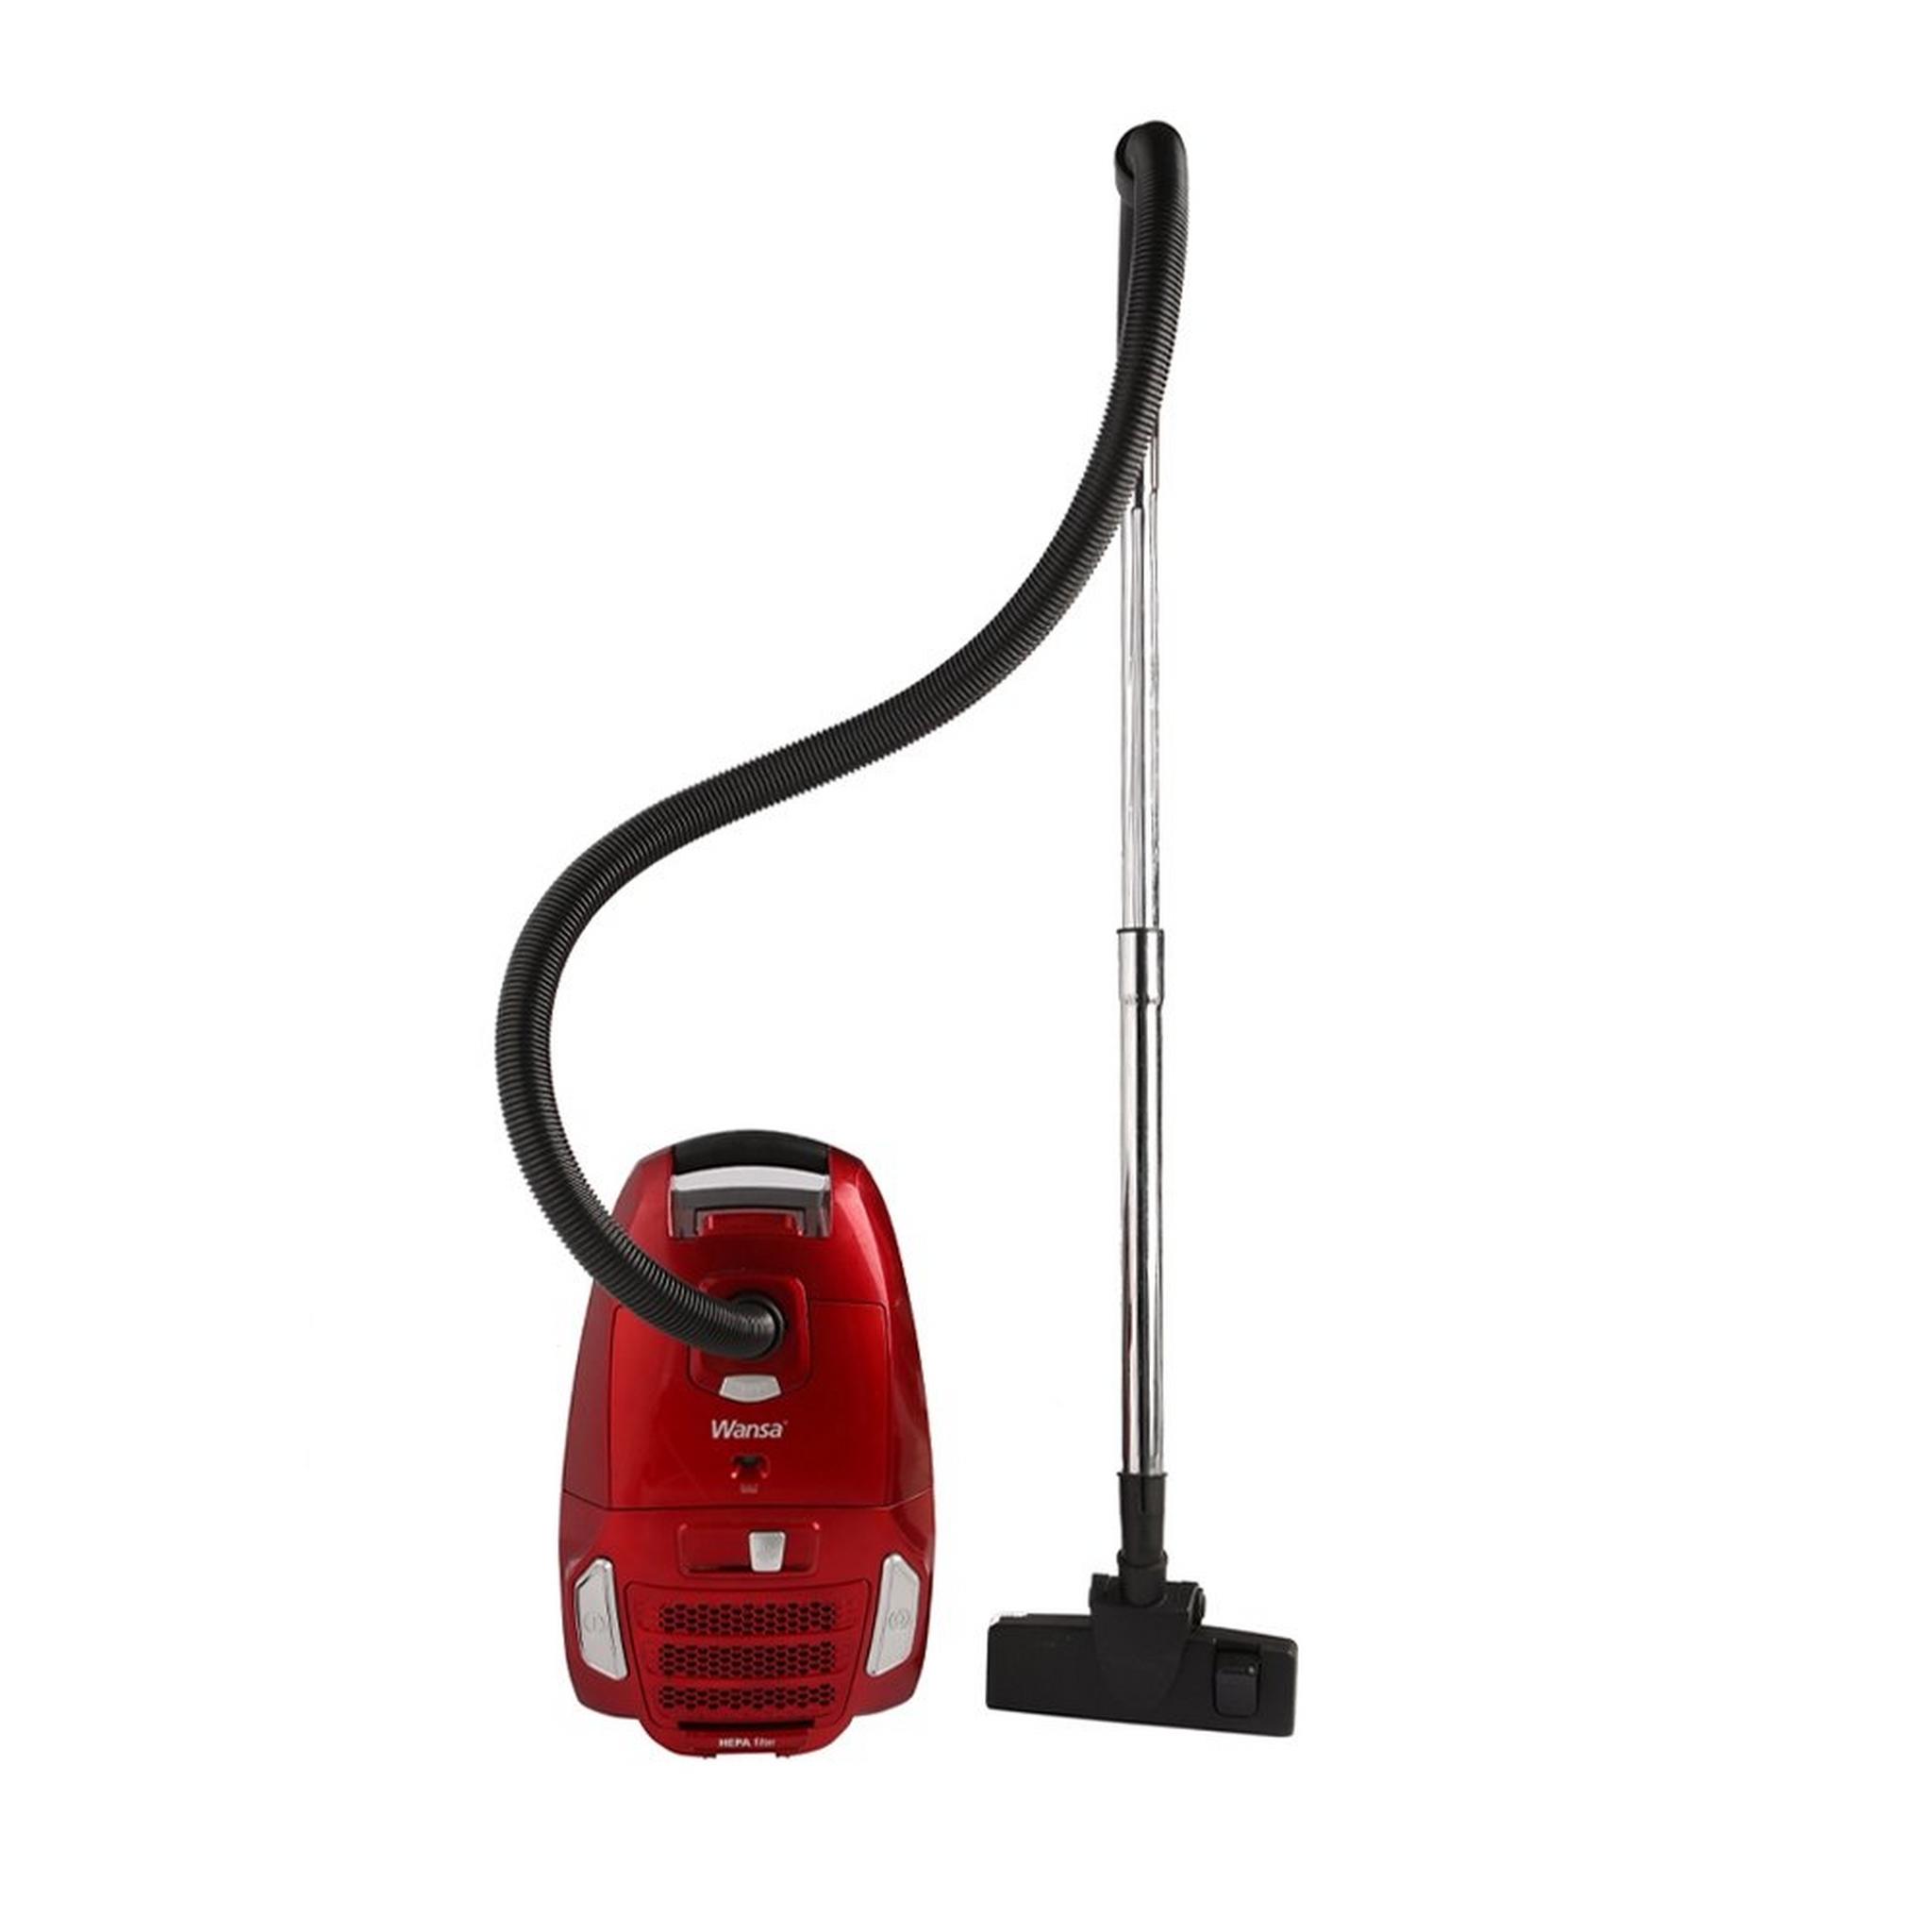 Wansa Canister Vacuum Cleaner 2400 Watts (VCB50A14E-D) - Red